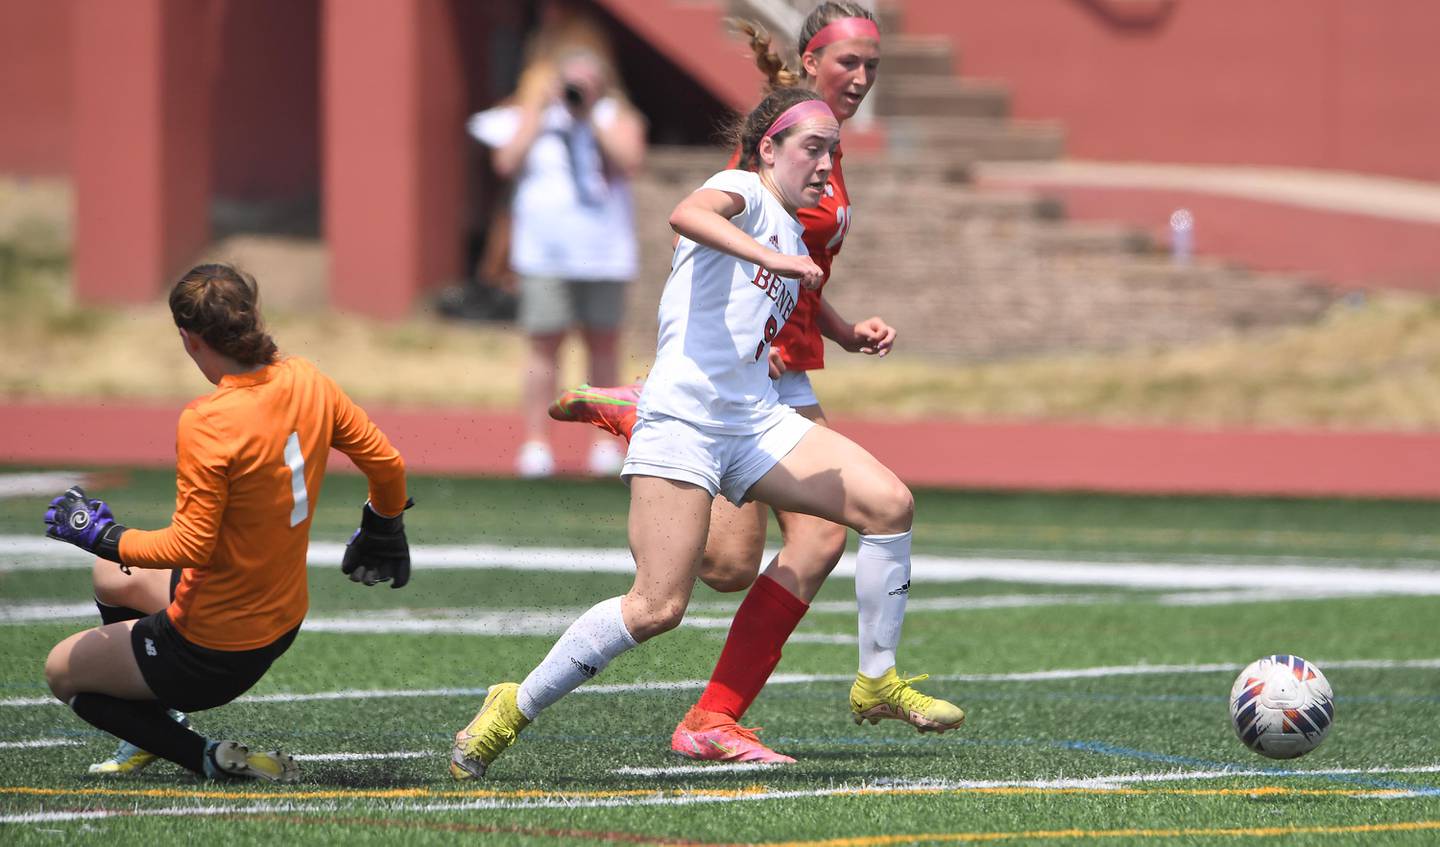 Benet Academy’s Keira Petrucelli gets past Glenwood goalkeeper Abi Stephens but loses the ball to a defensive kick from Haden Vlcek, background, in the IHSA girls Class 2A state soccer championship game at North Central College in Naperville on Saturday, June 3, 2023.